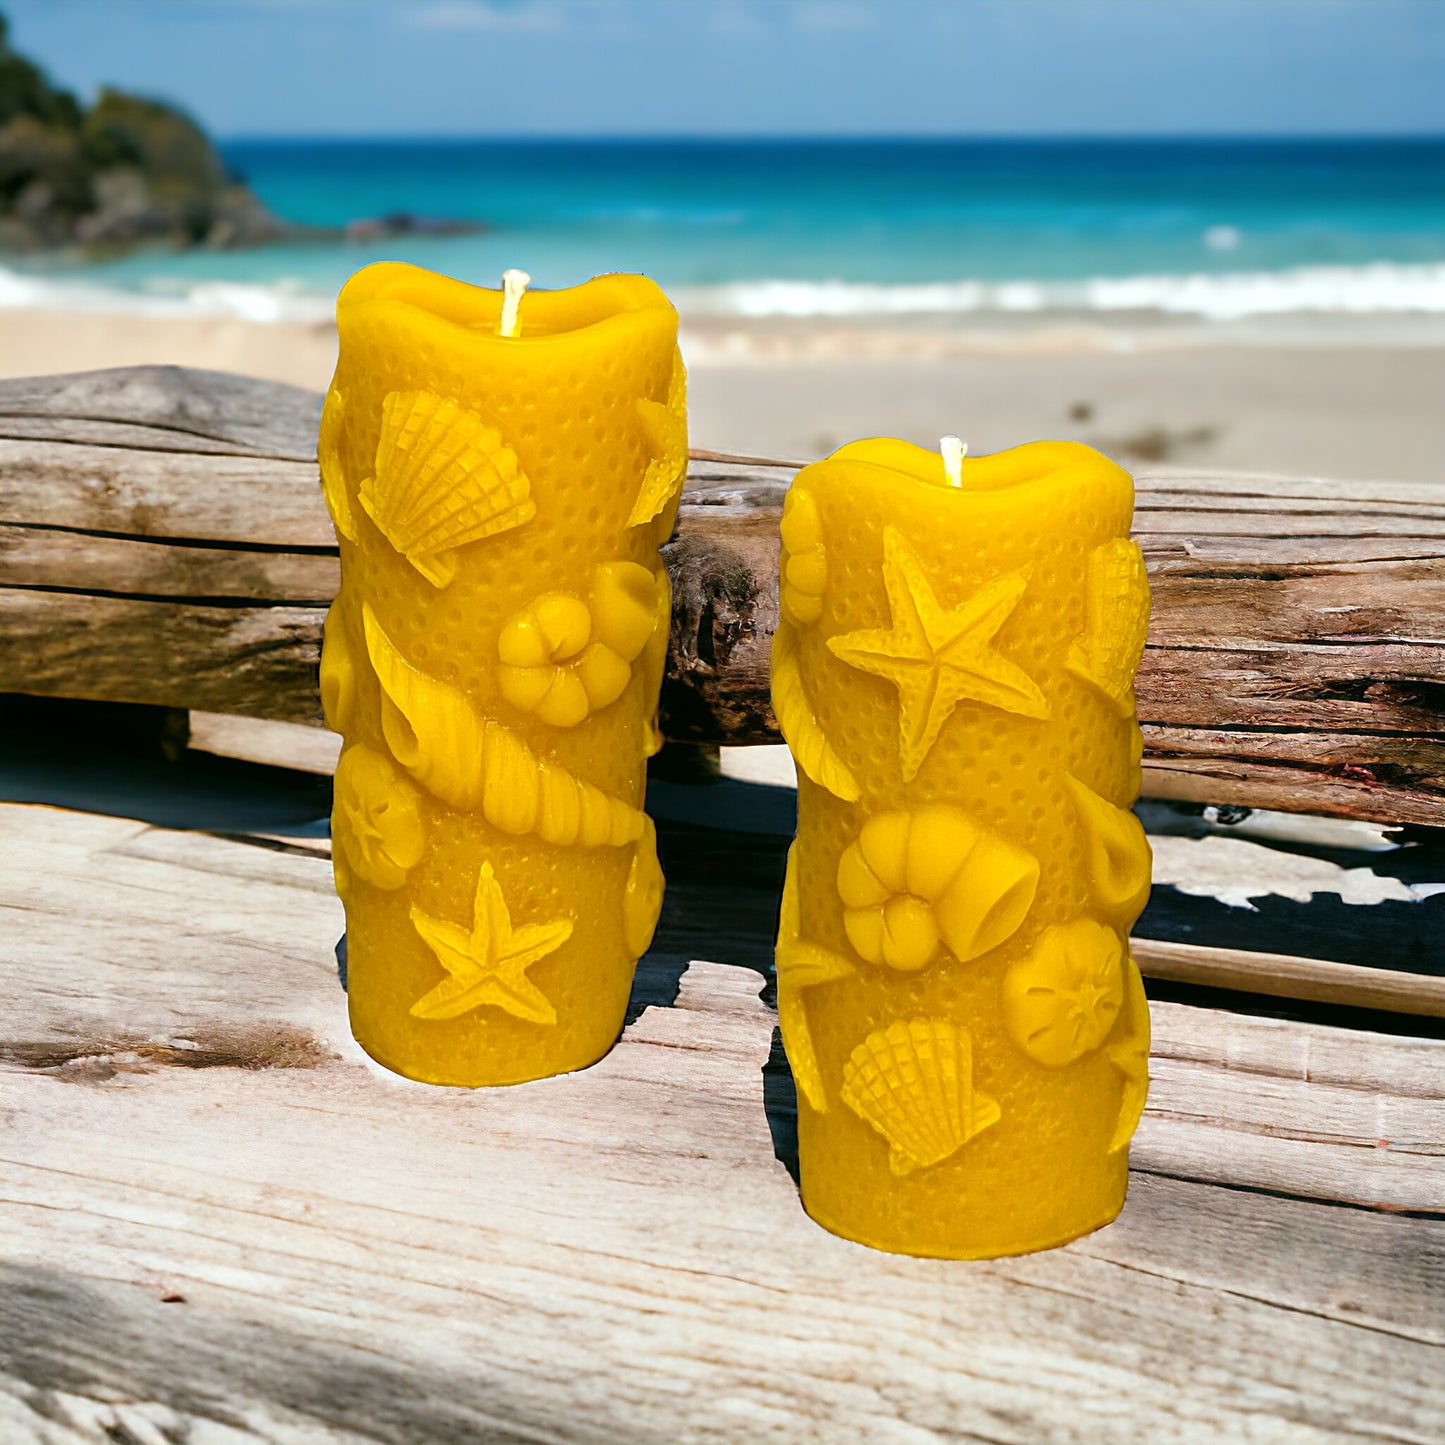 Ocean Shell Conch Starfish Beach Theme - Pure Beeswax Candle - Set of 2